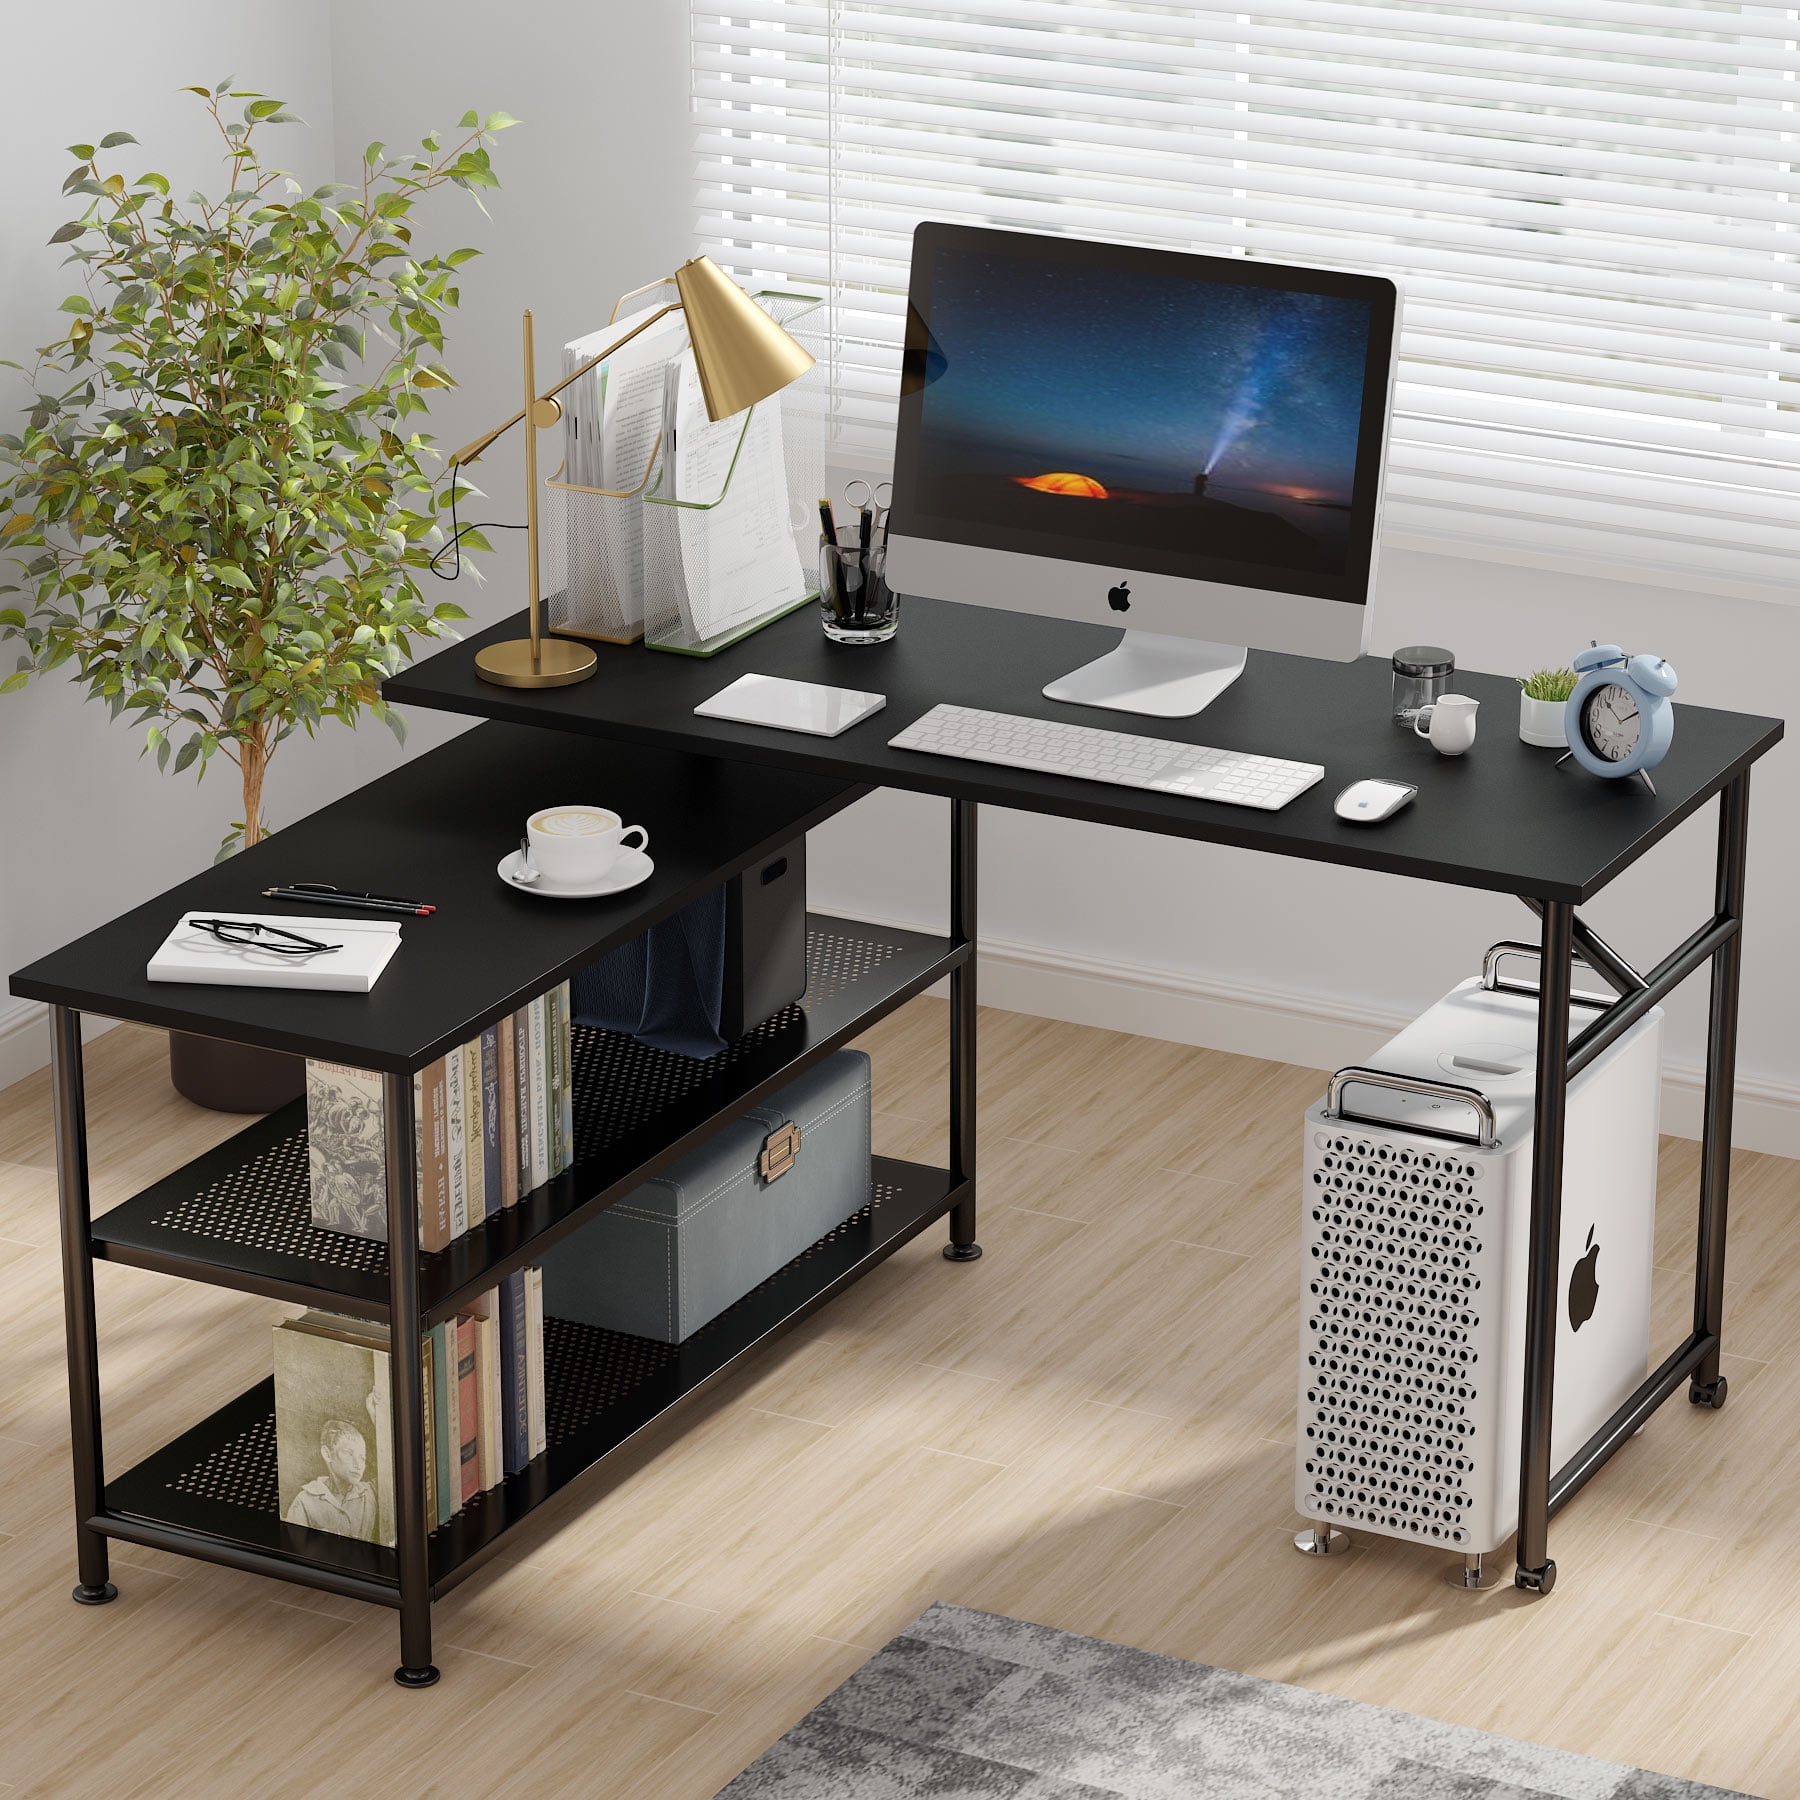 Tribesigns Folding Computer Desk With, Small Home Office Corner Computer Desktop